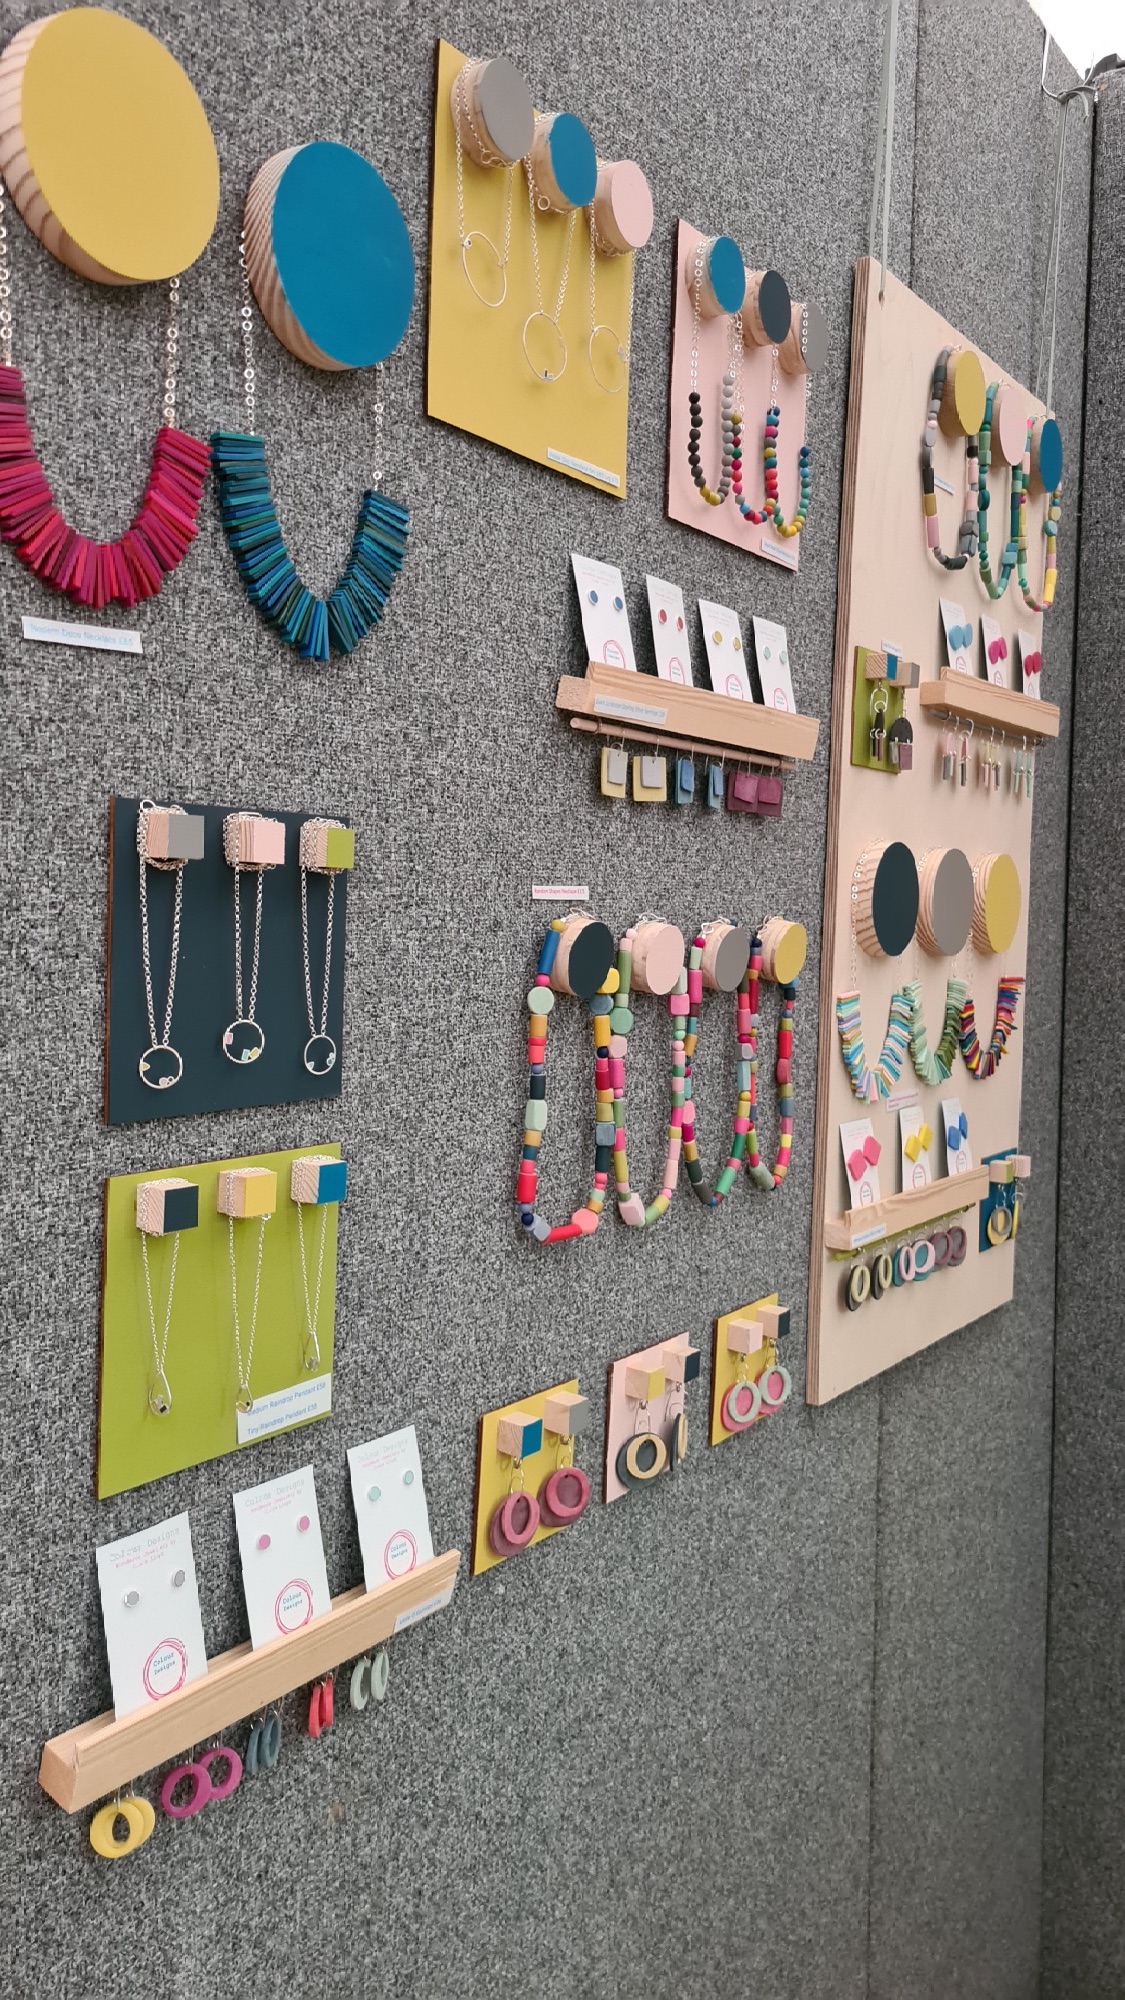 Colour Designs colourful jewellery stand at Bovey Tracey Craft Festival 